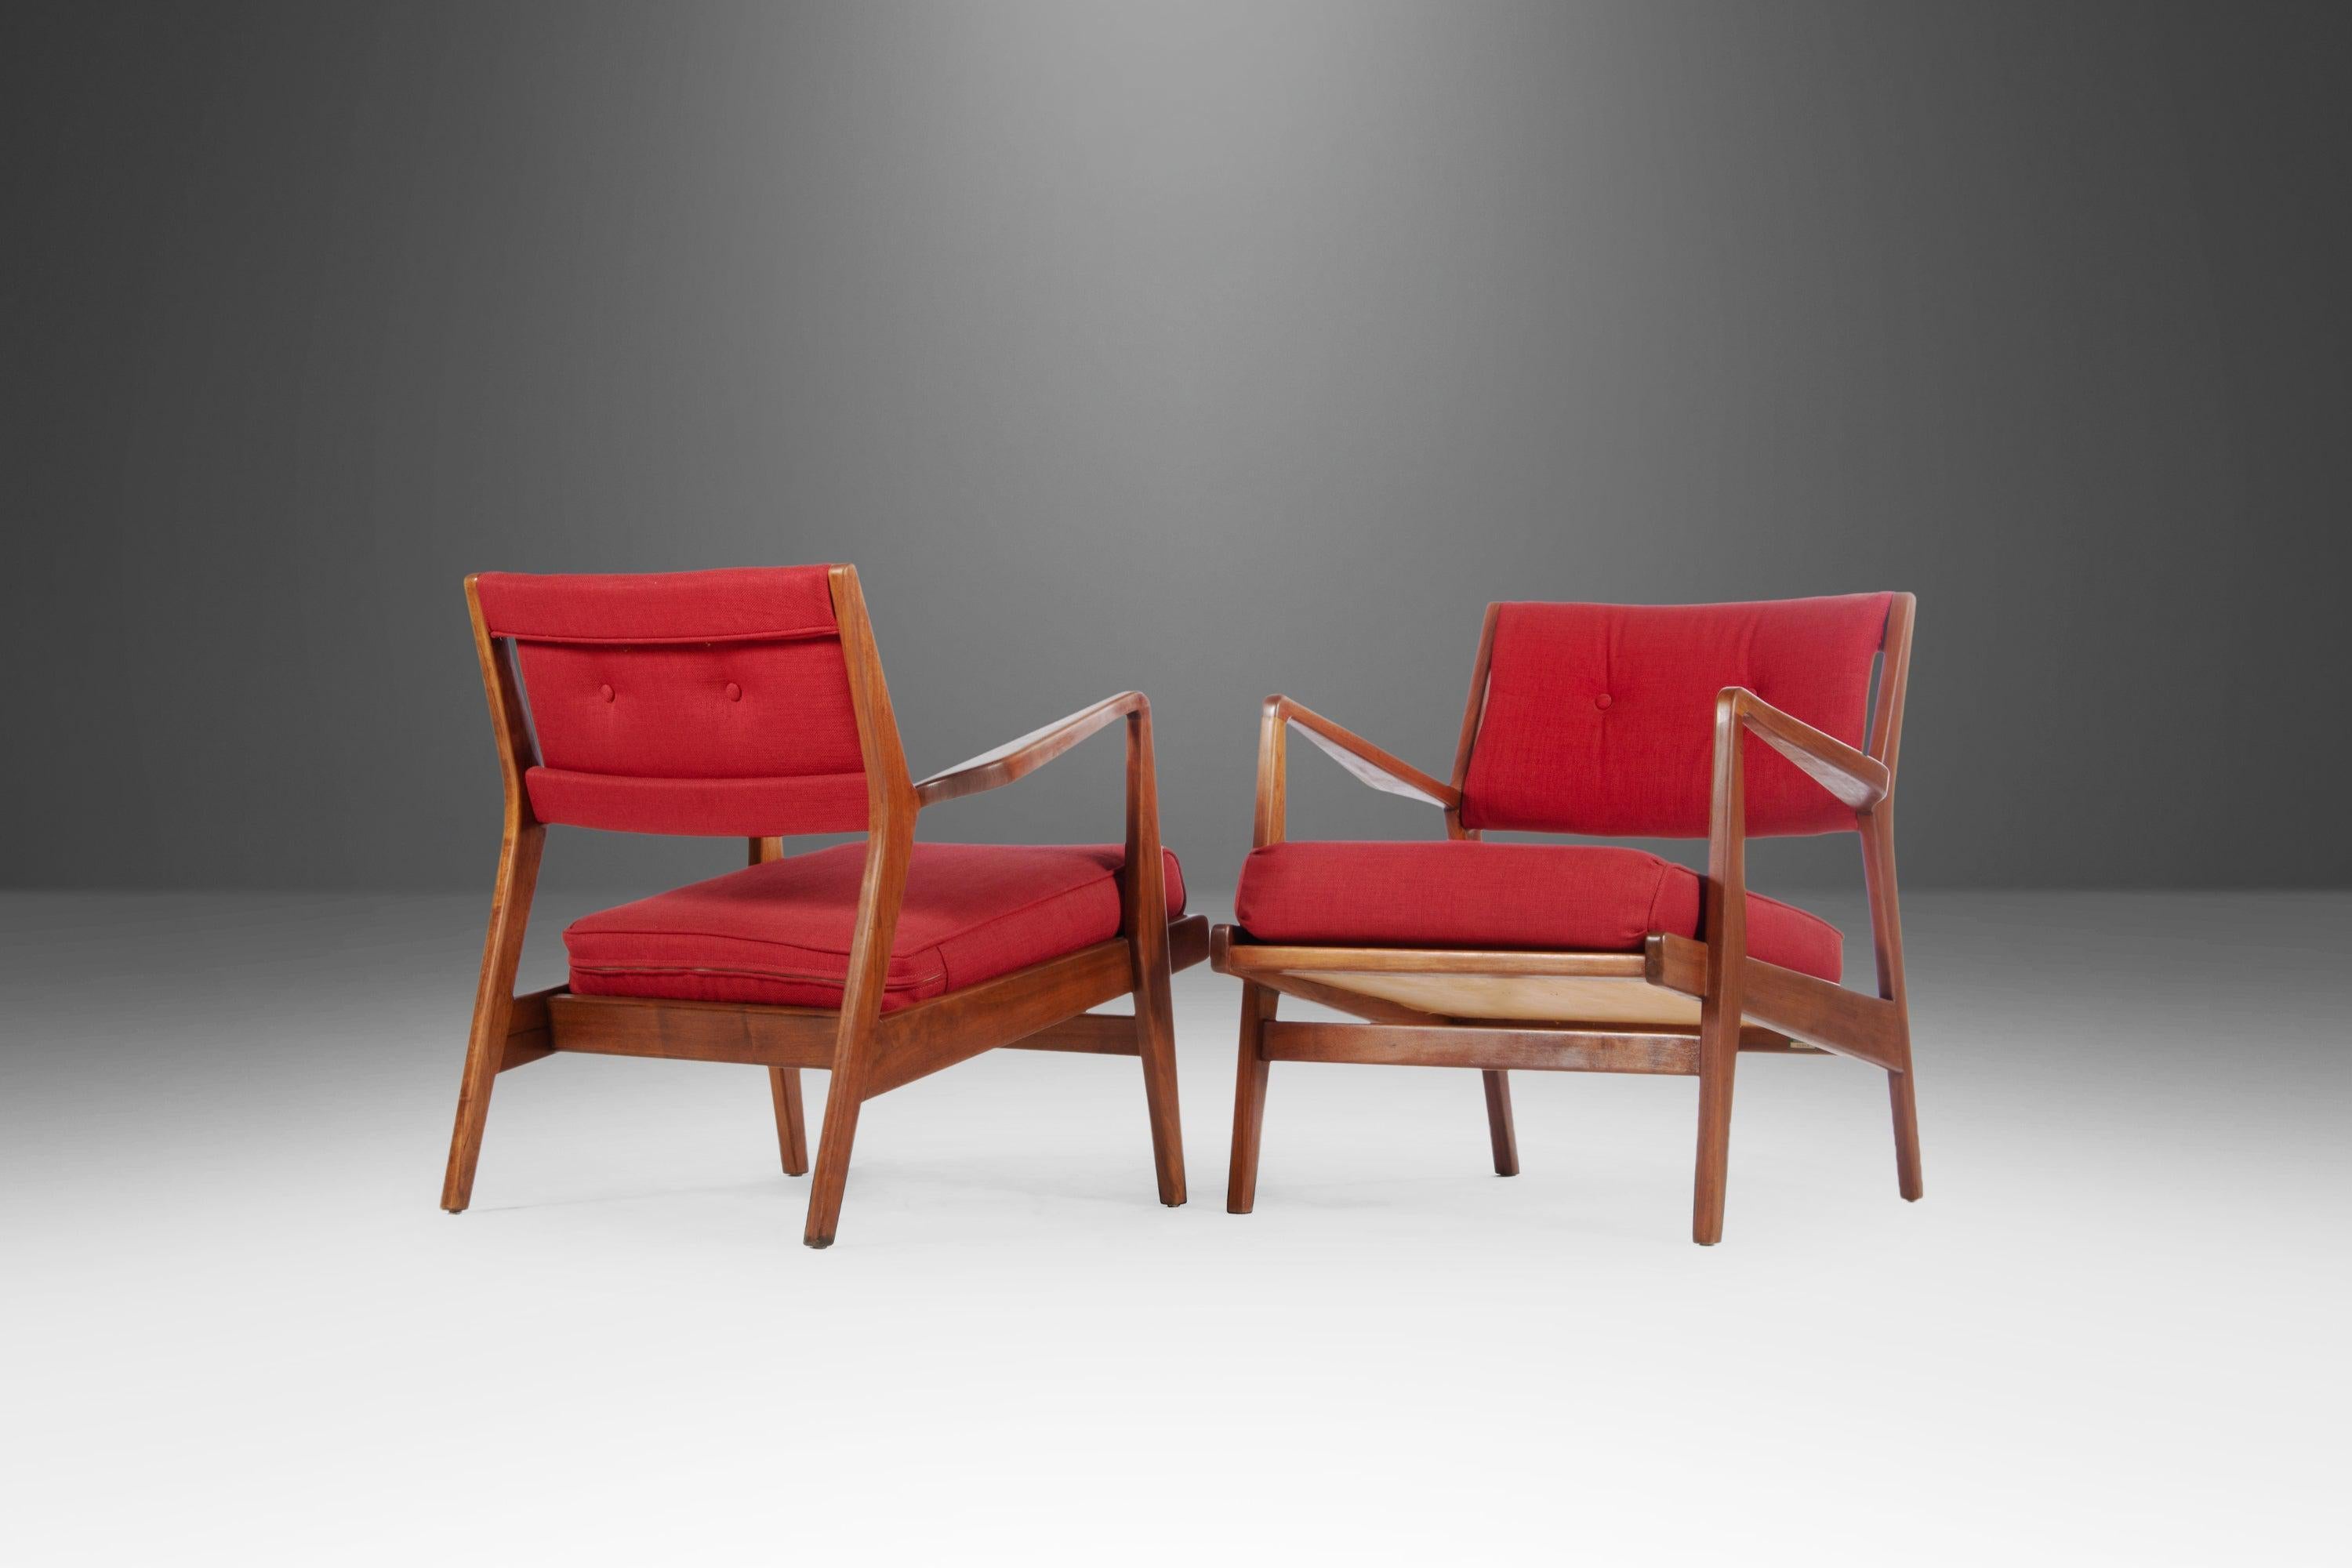 American Set of Two '2' Jens Risom for Knoll Lounge Chairs Model U-430, USA, c. 1960's